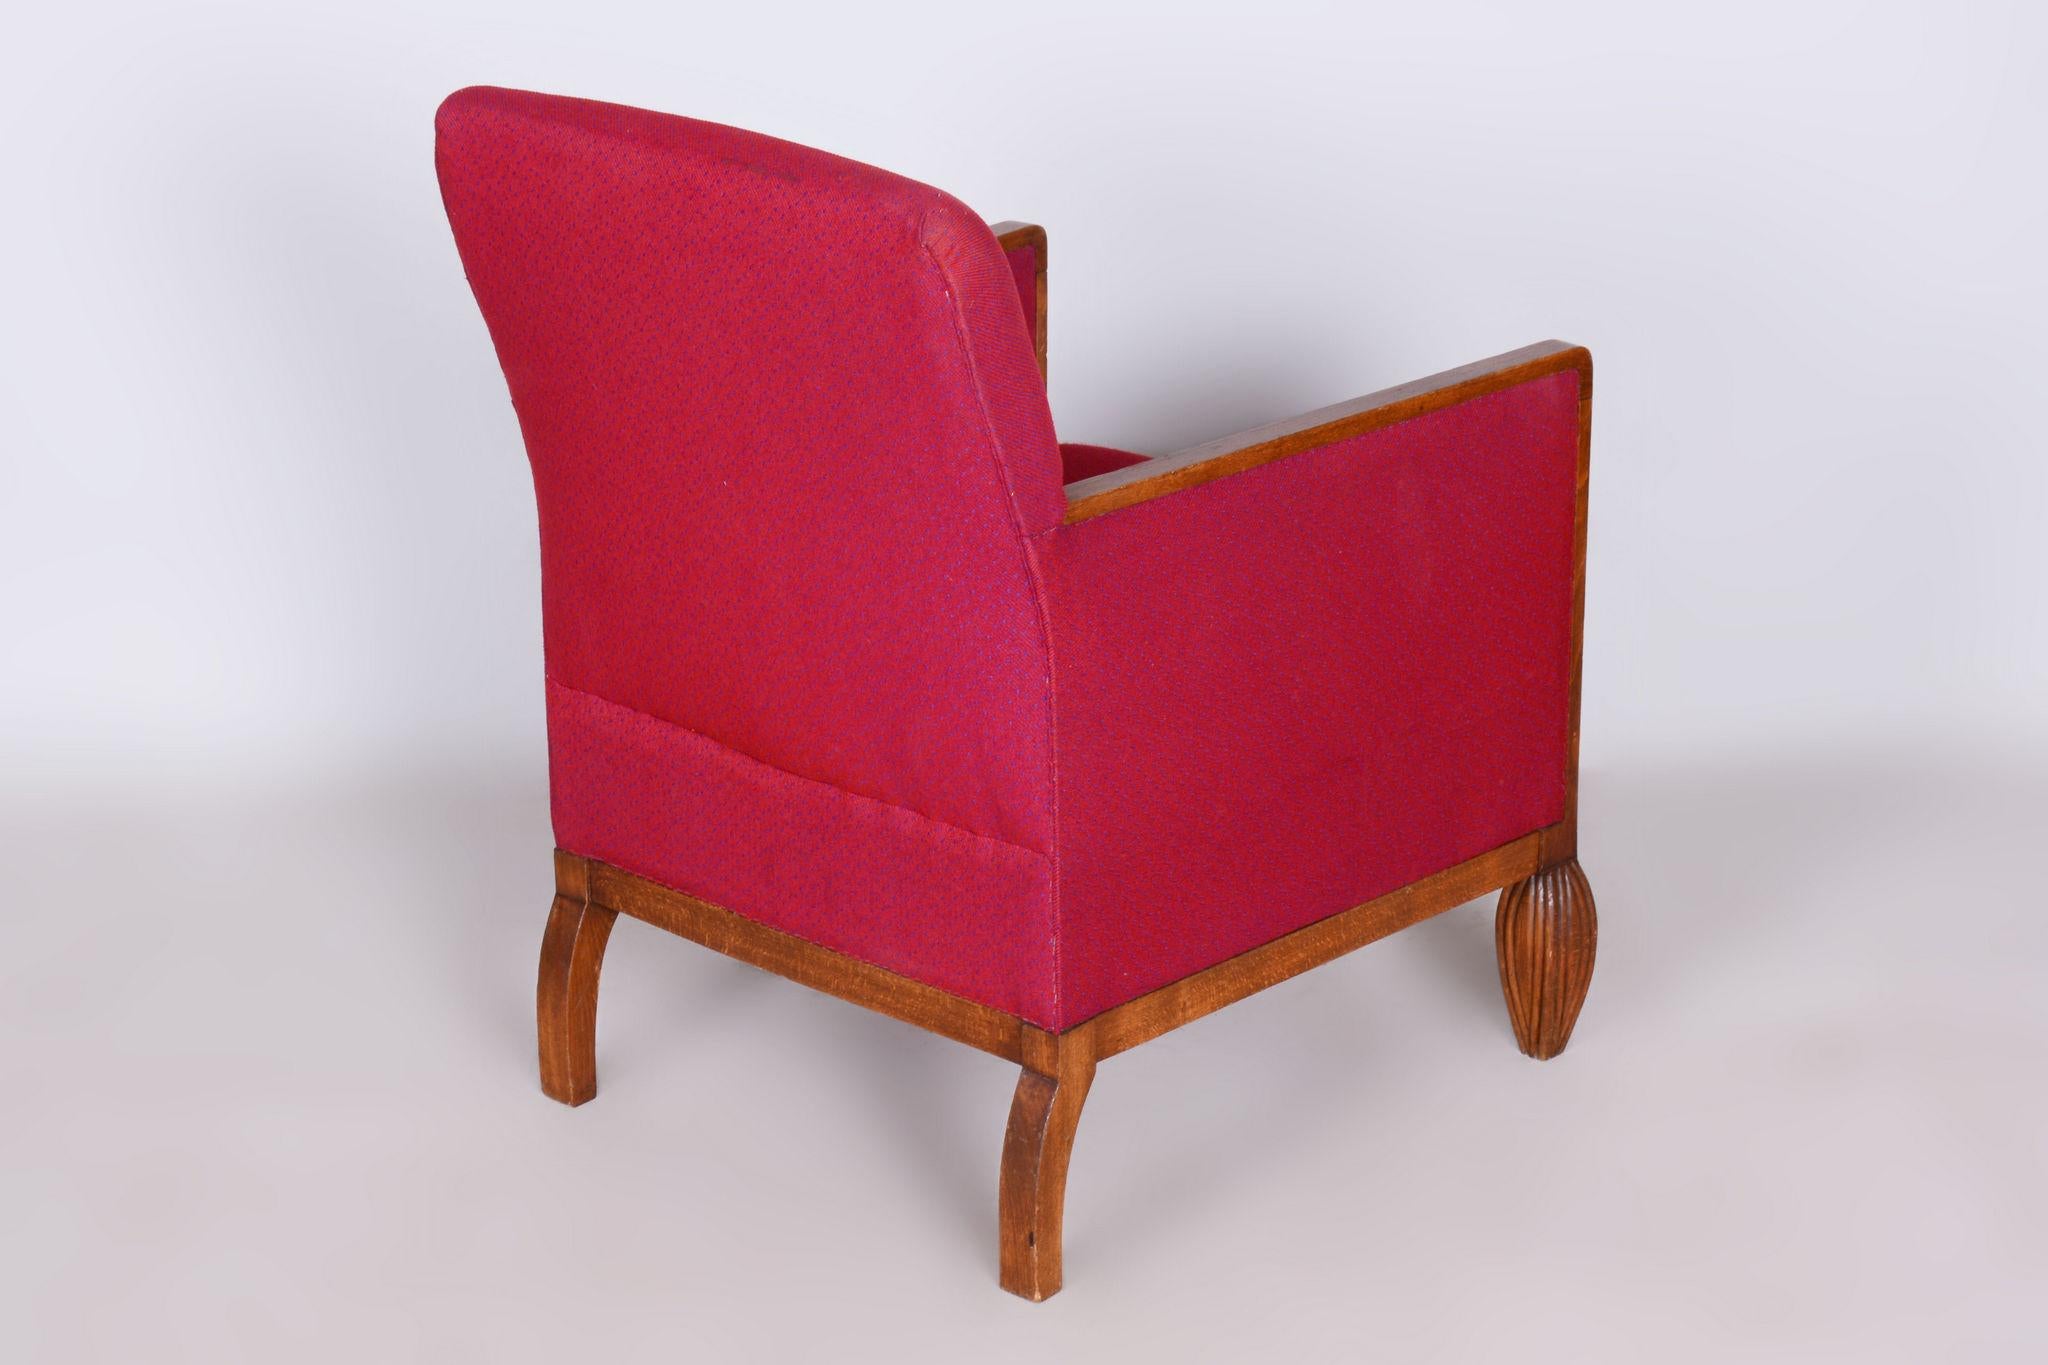 Restored Art Deco Red Armchair, Beech, Original Upholstery, France, 1930s For Sale 3